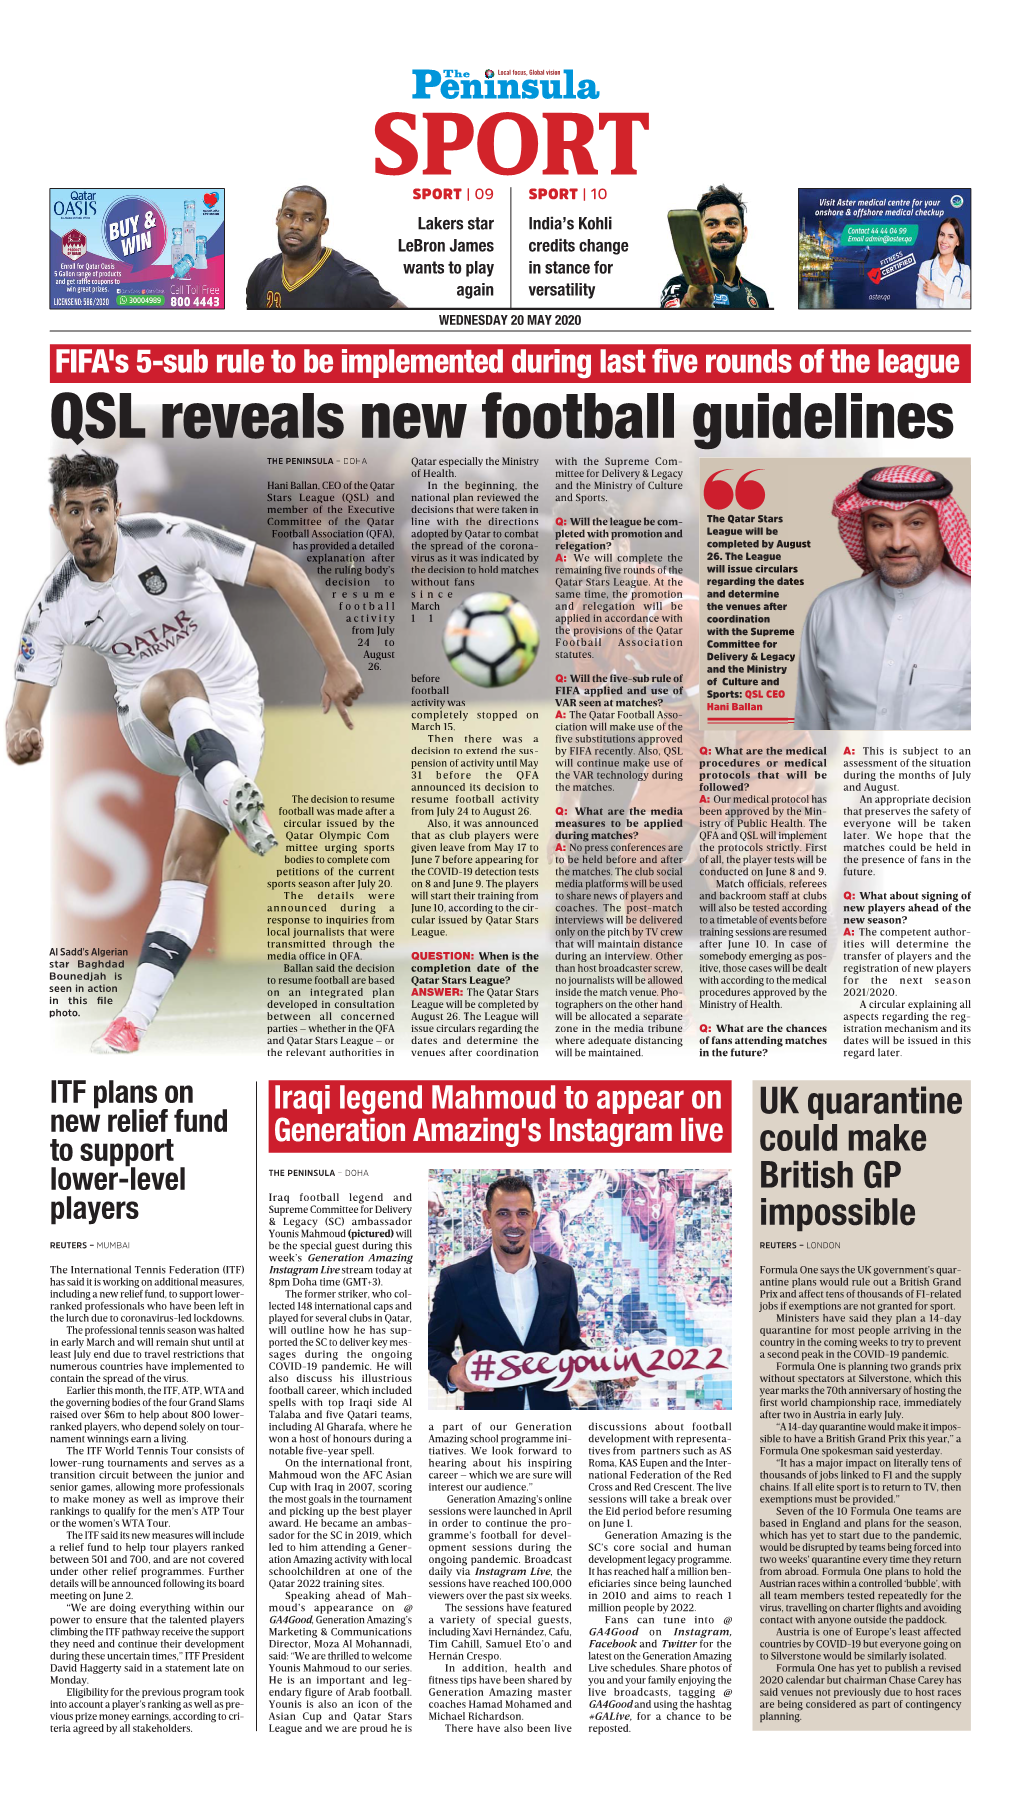 QSL Reveals New Football Guidelines